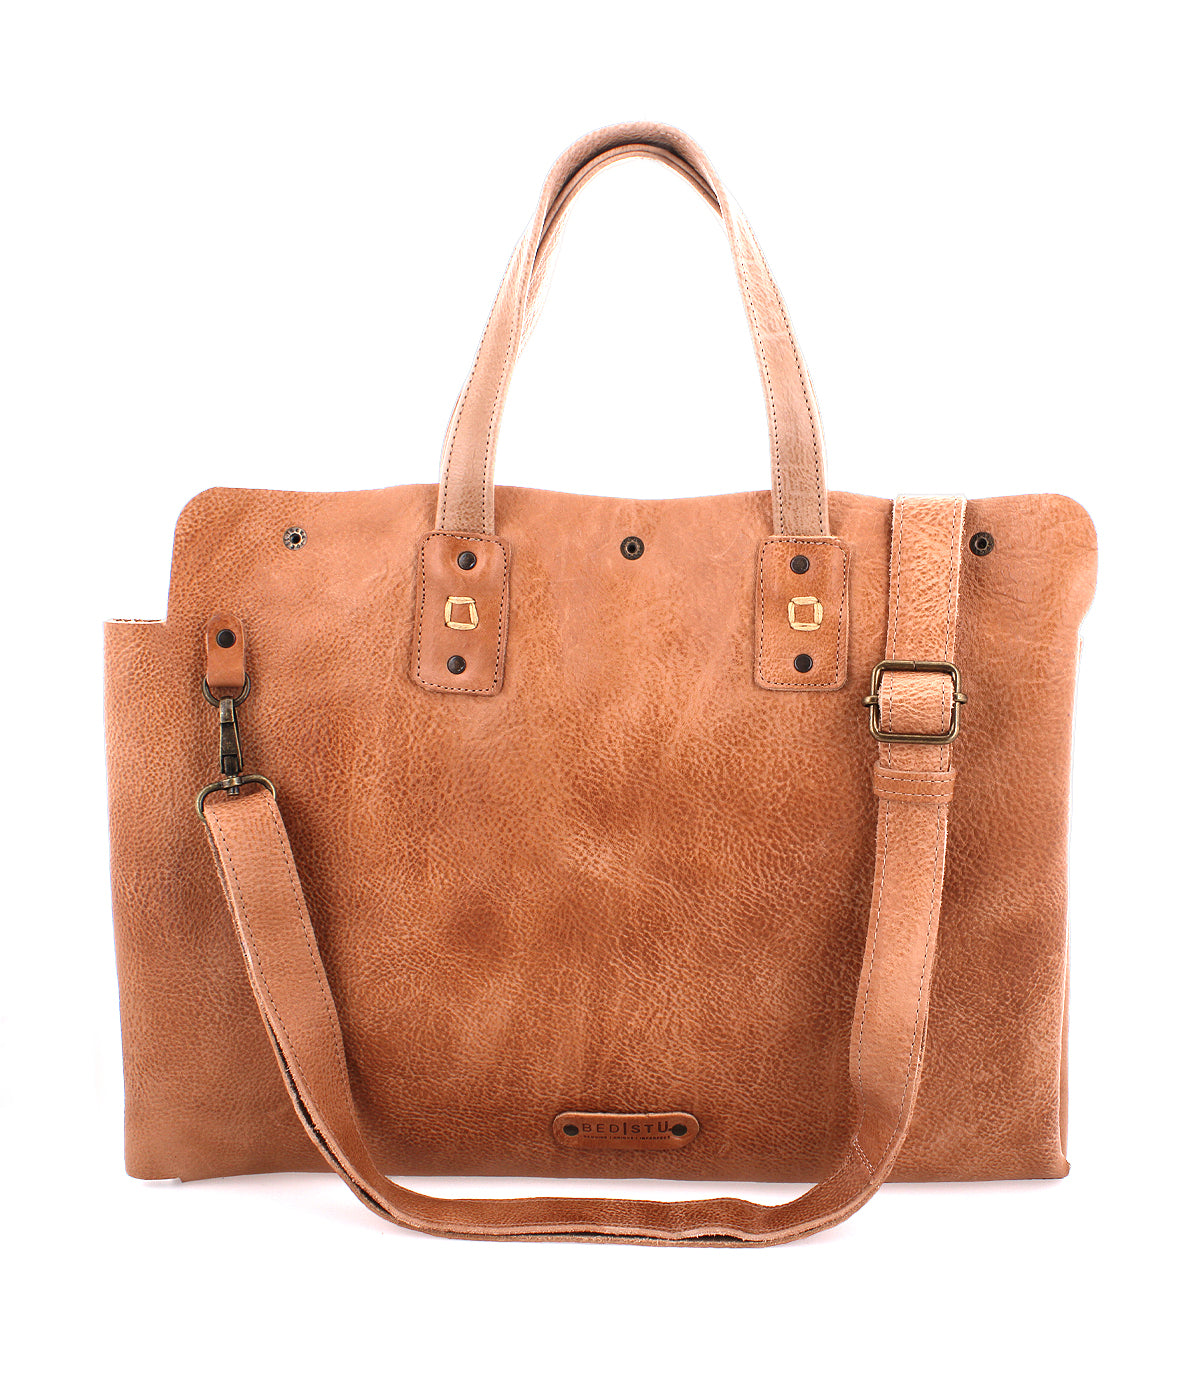 A tan leather tote bag with a shoulder strap, perfect for commuters, named the "Commuter" by Bed Stu.